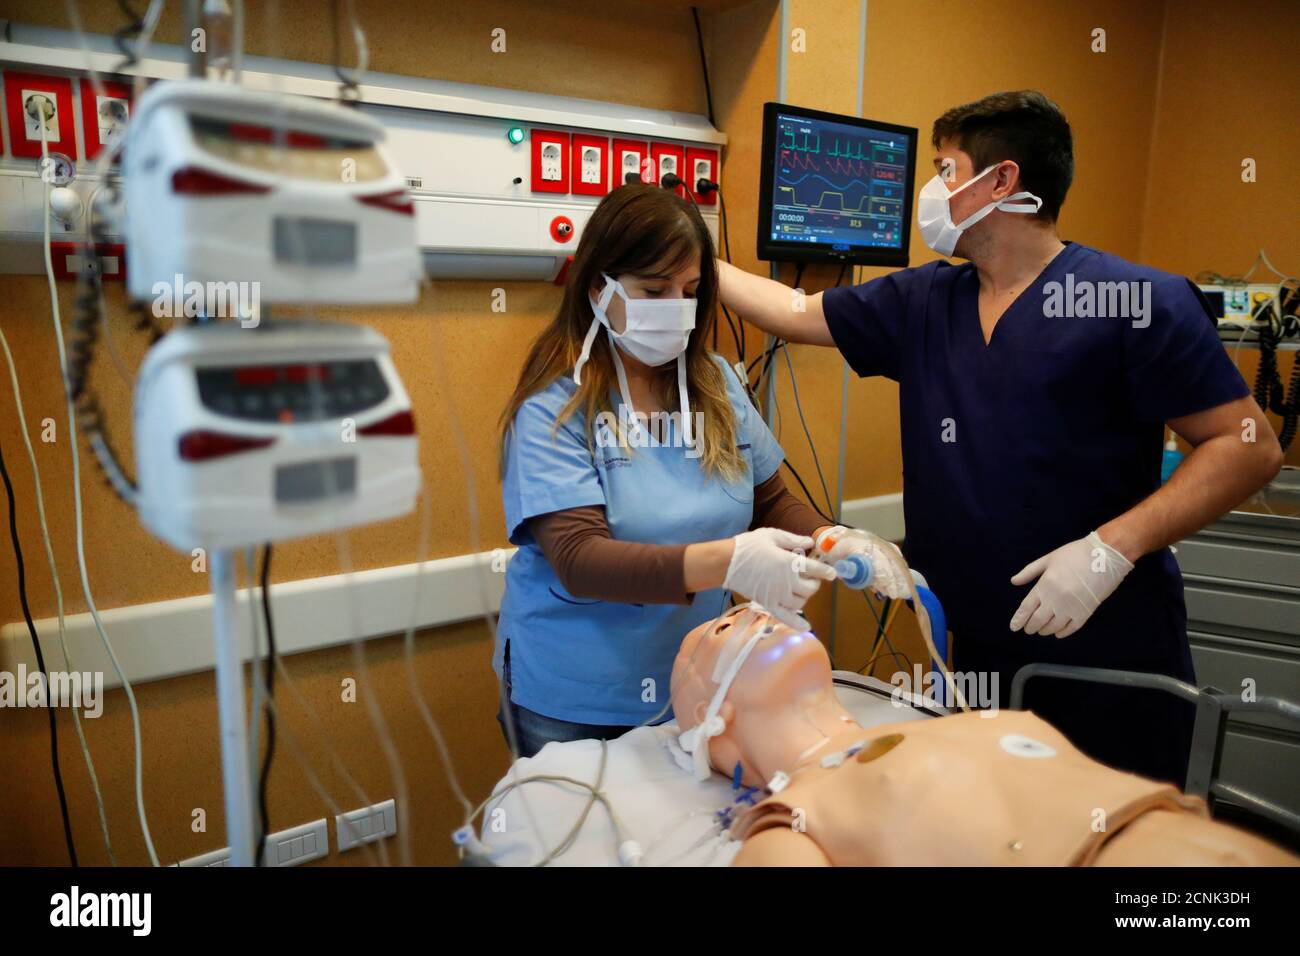 Pediatric specialist Norma Raul attaches a respirator system for training  reasons to a dummy at the El Cruce hospital, as the spread of the  coronavirus disease (COVID-19) continues, in Florencio Varela, on